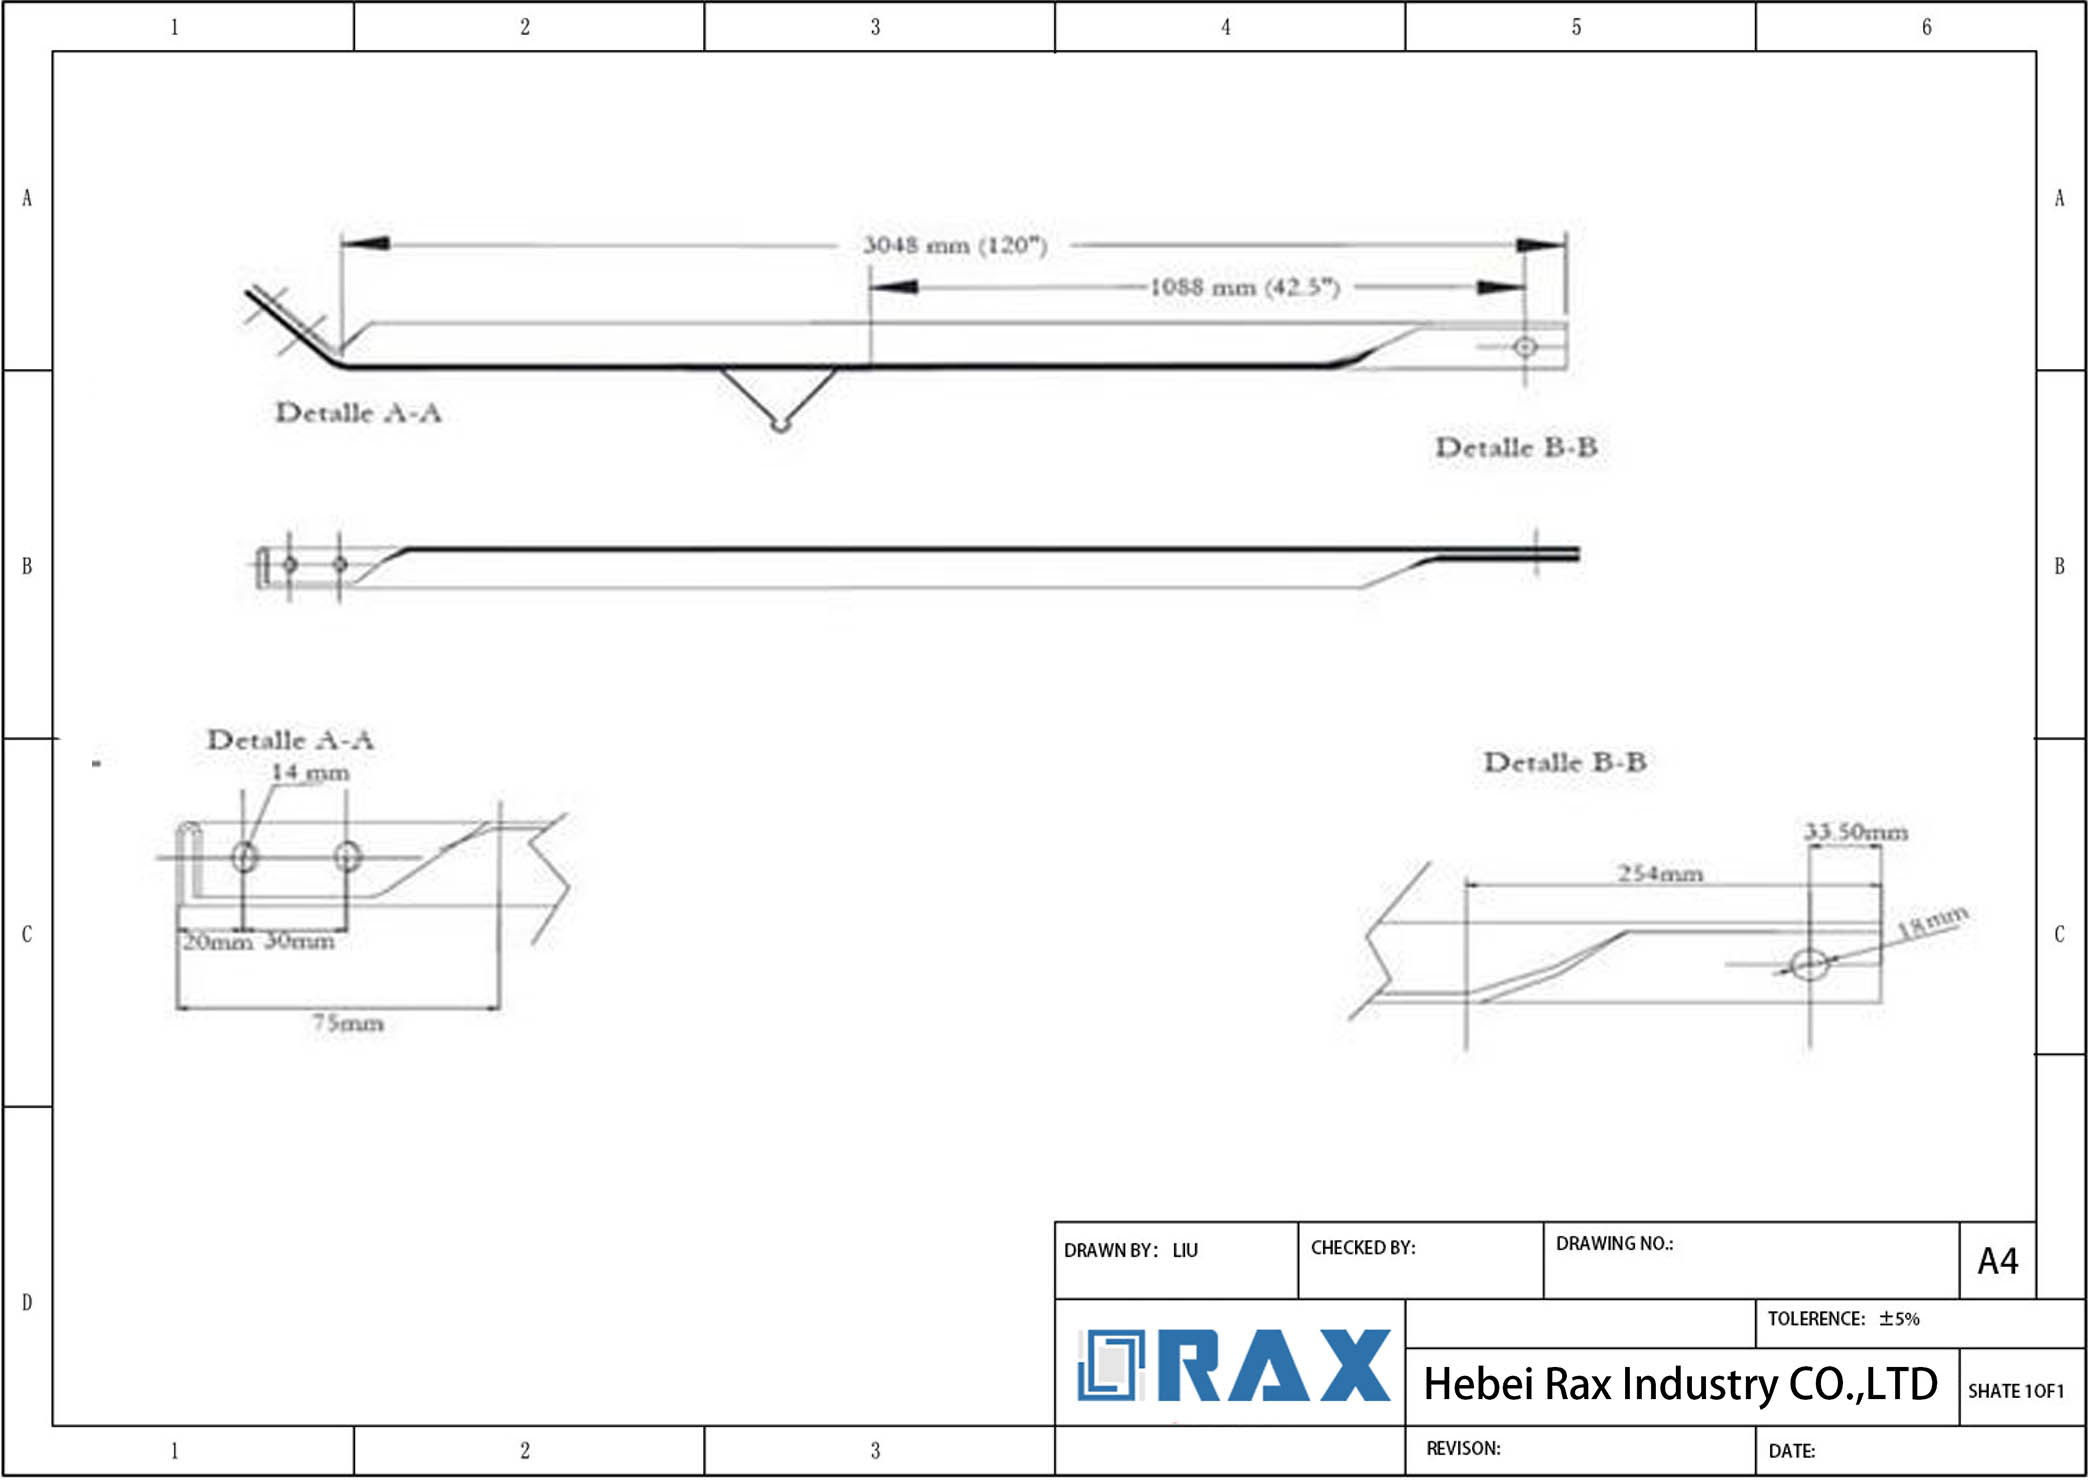 Technical drawing of alley arm